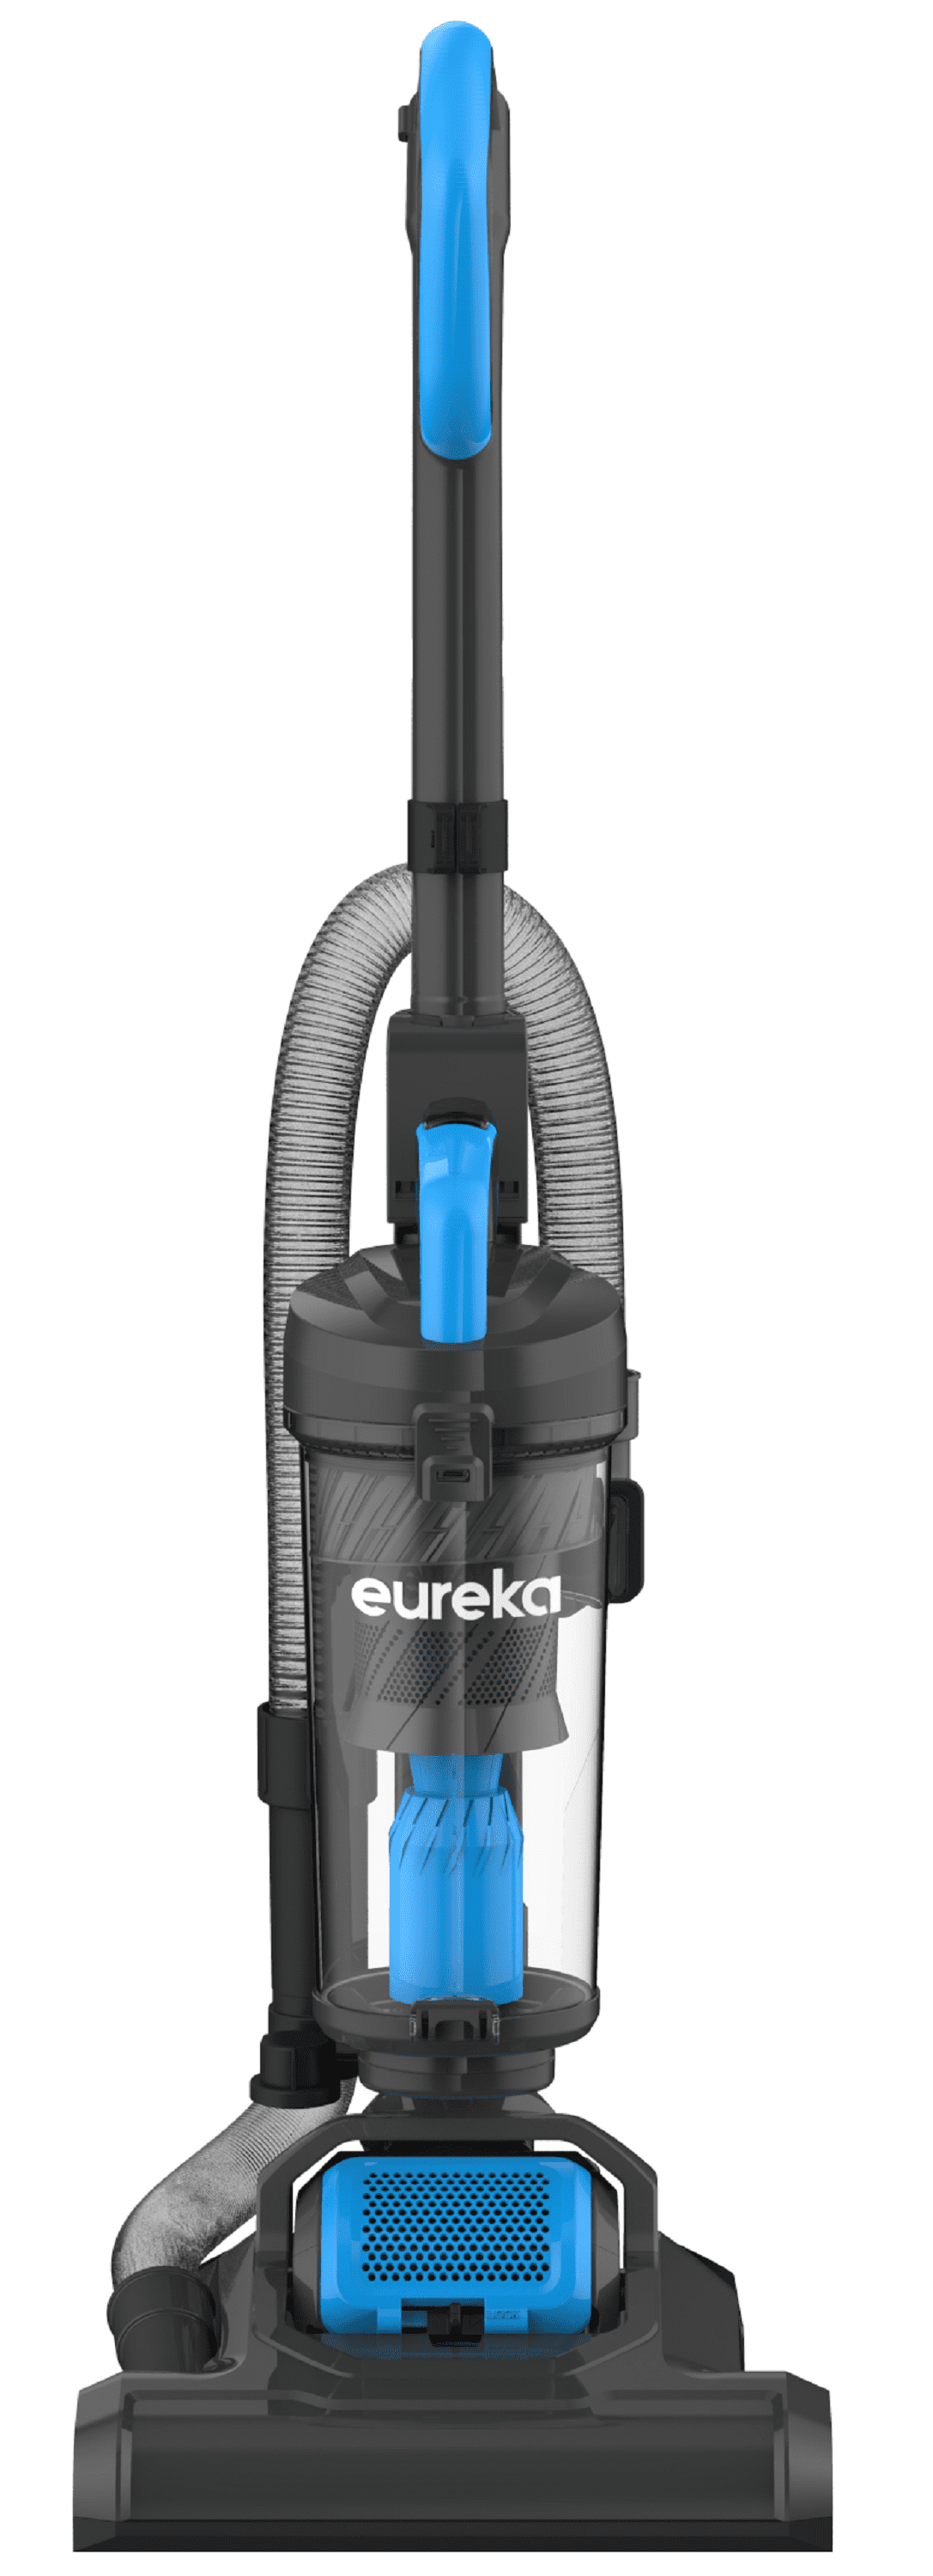 Eureka Max Swivel Deluxe Upright Multi-Surface Vacuum with No Loss of Suction & Swivel Steering, NEU250 - 1